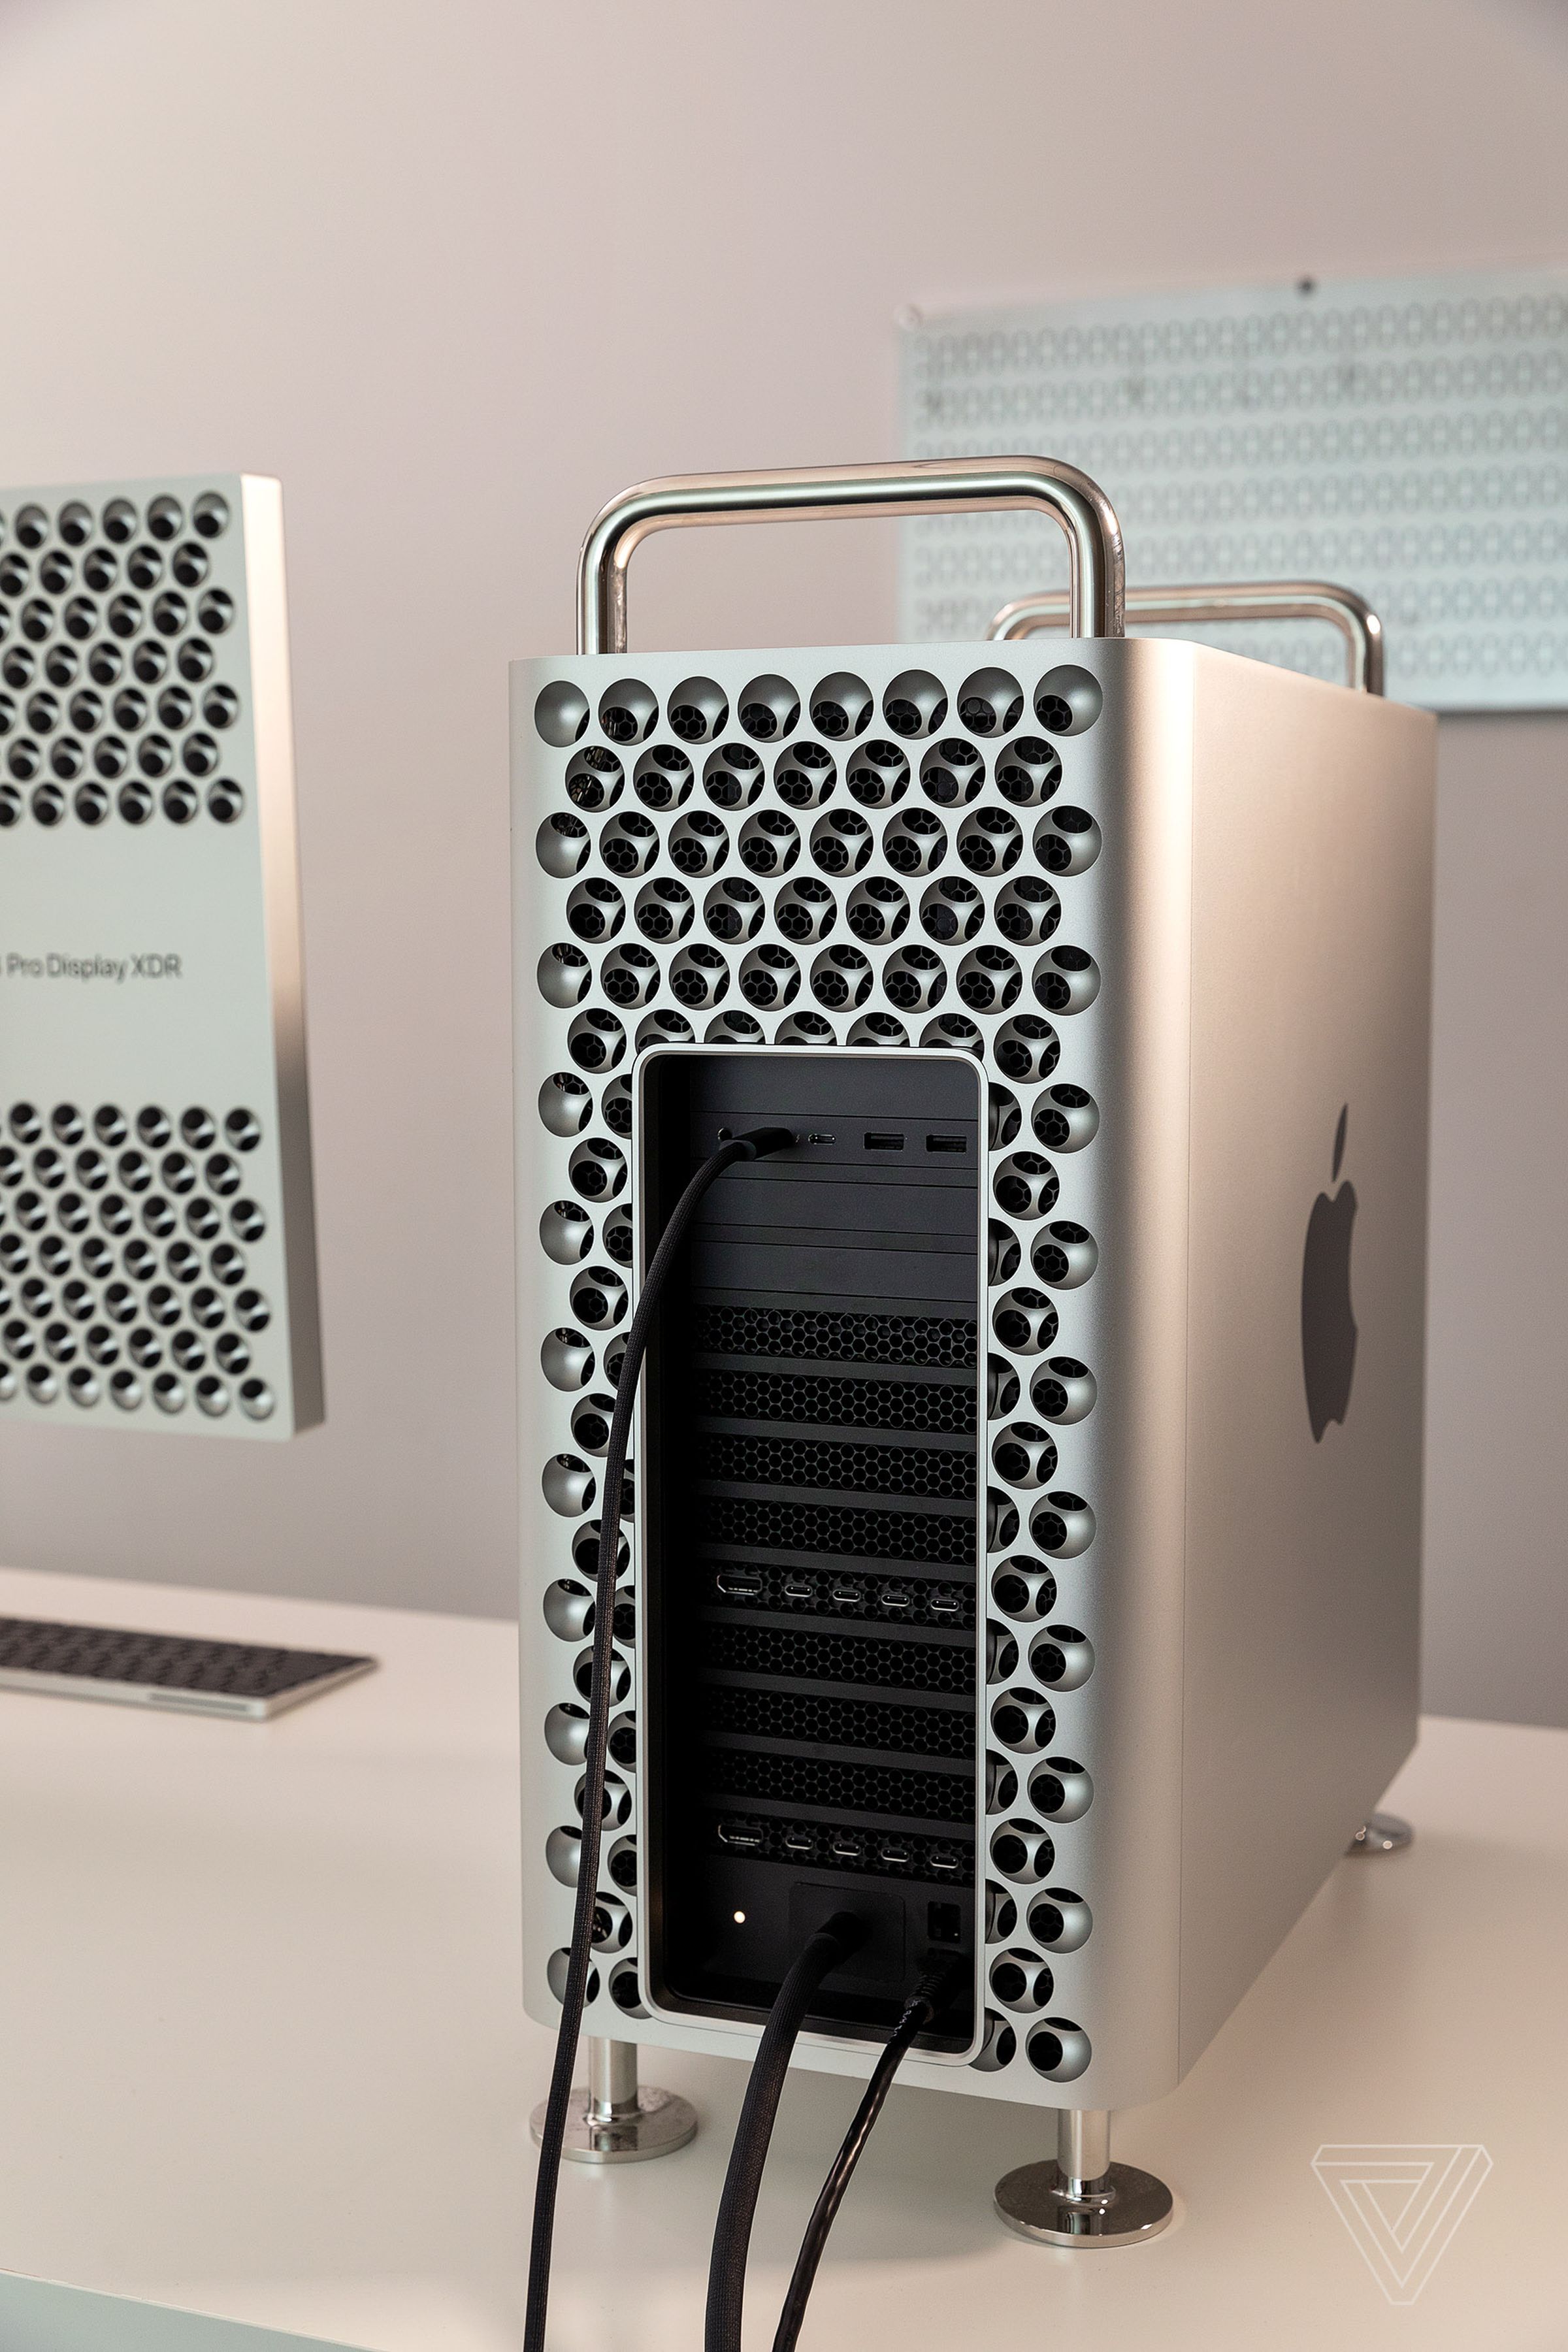 Back of the Mac Pro